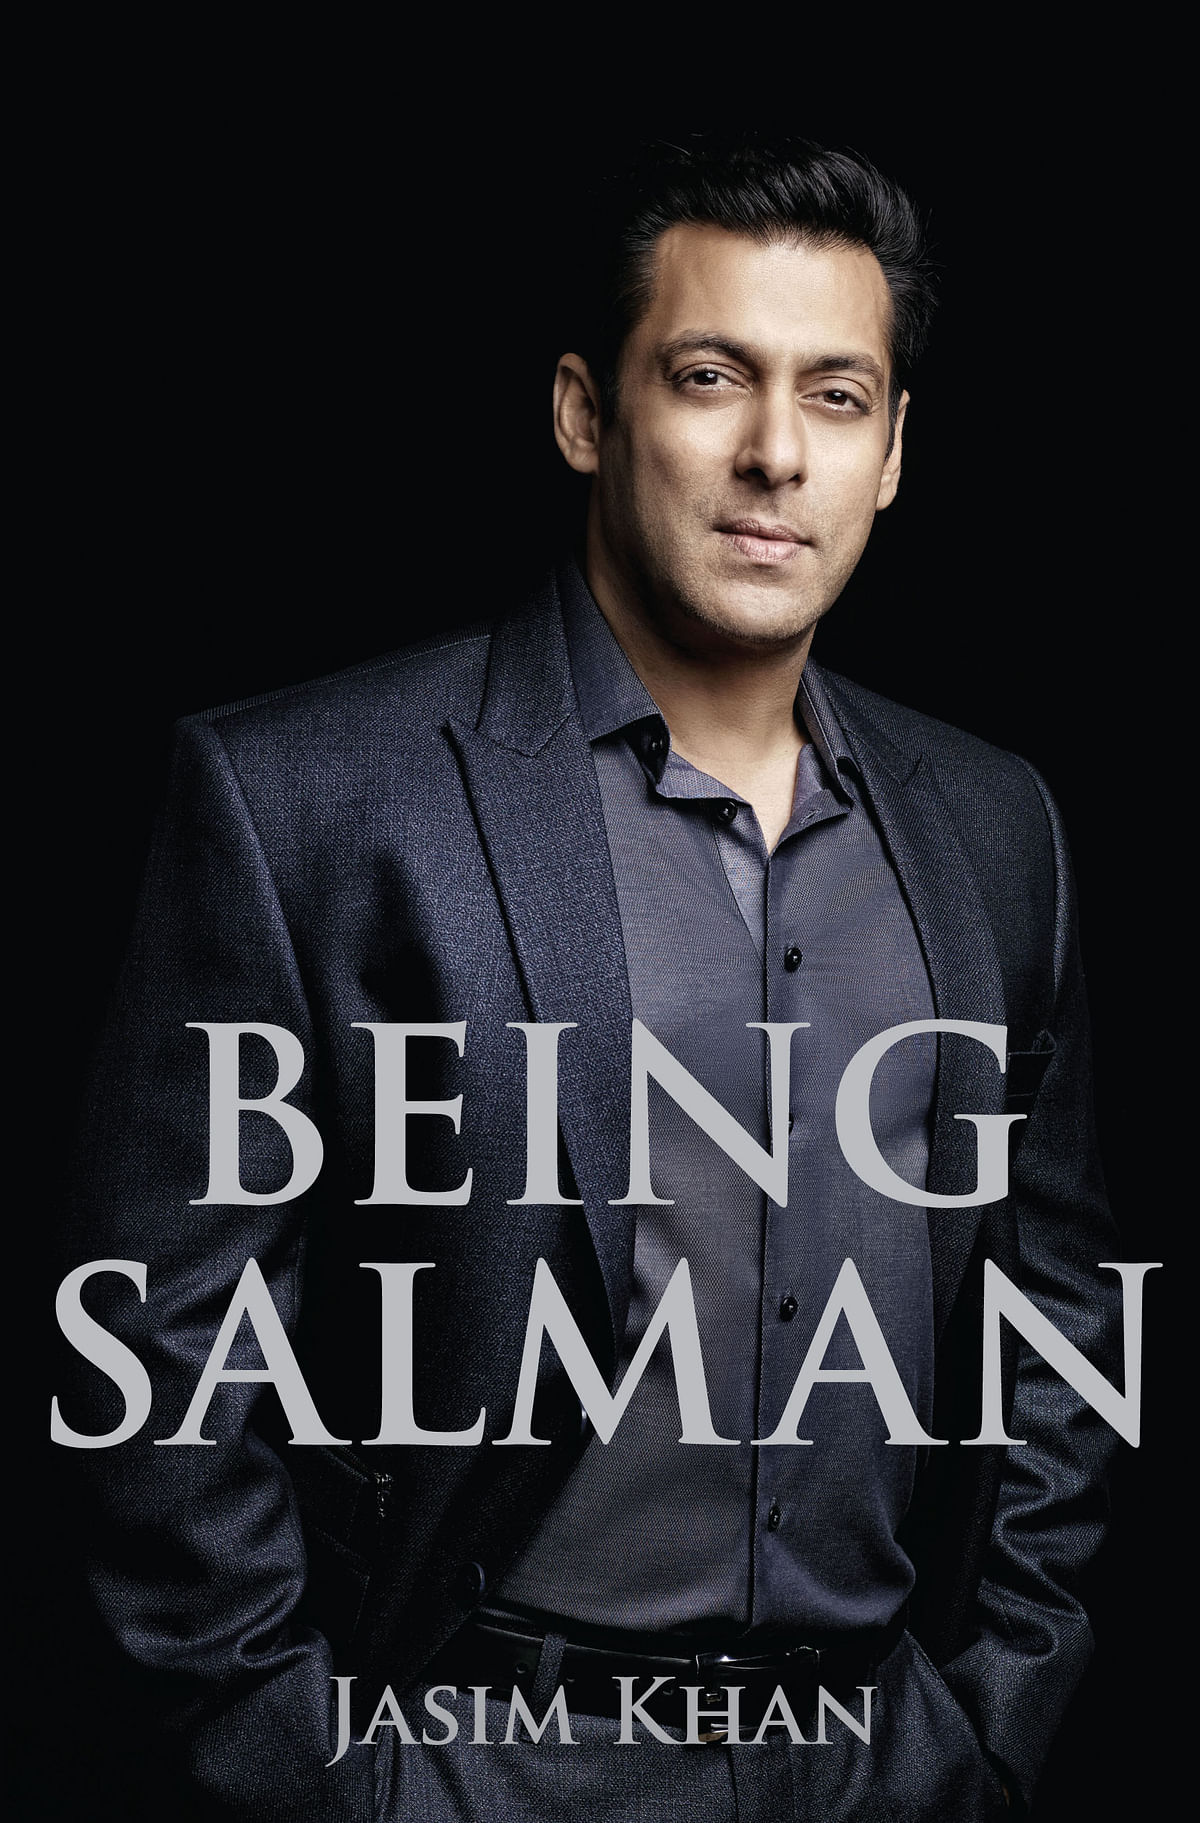 An exclusive sneak peak into ‘Being Salman’, a biography of Salman Khan out on stands today.